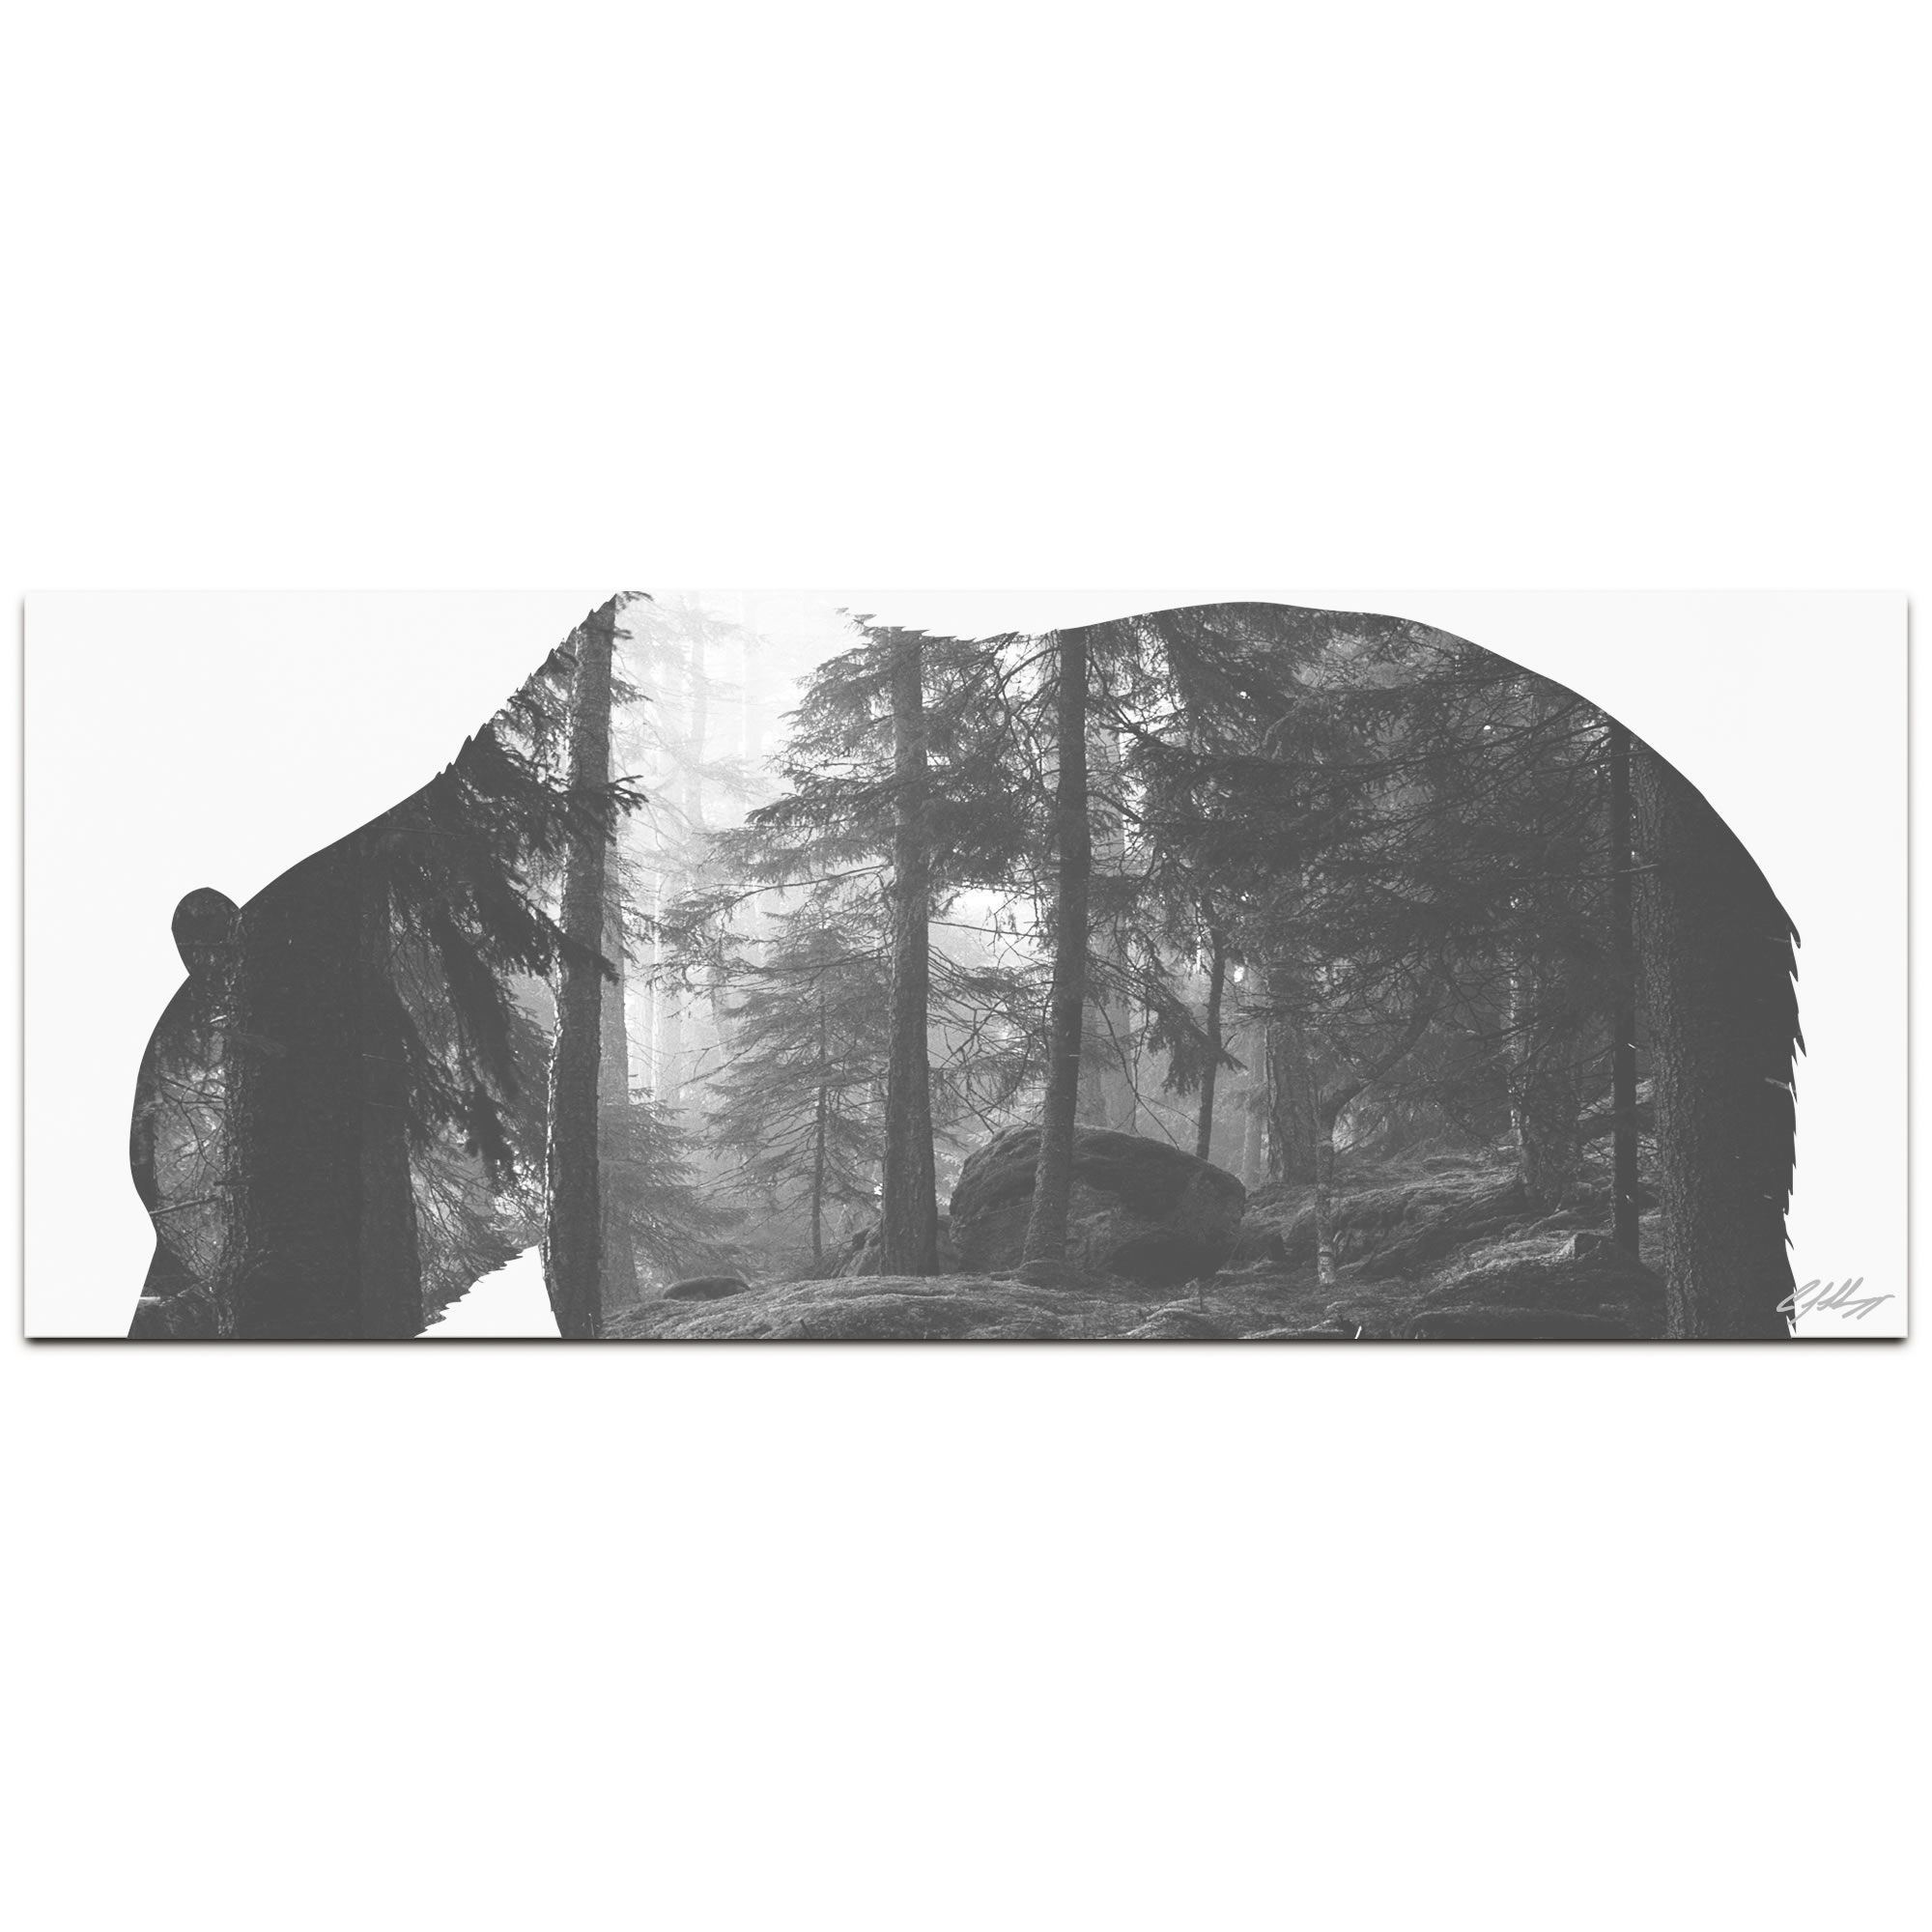 GRIZZLY BEAR FOREST - 48x19 in. Metal Animal Print